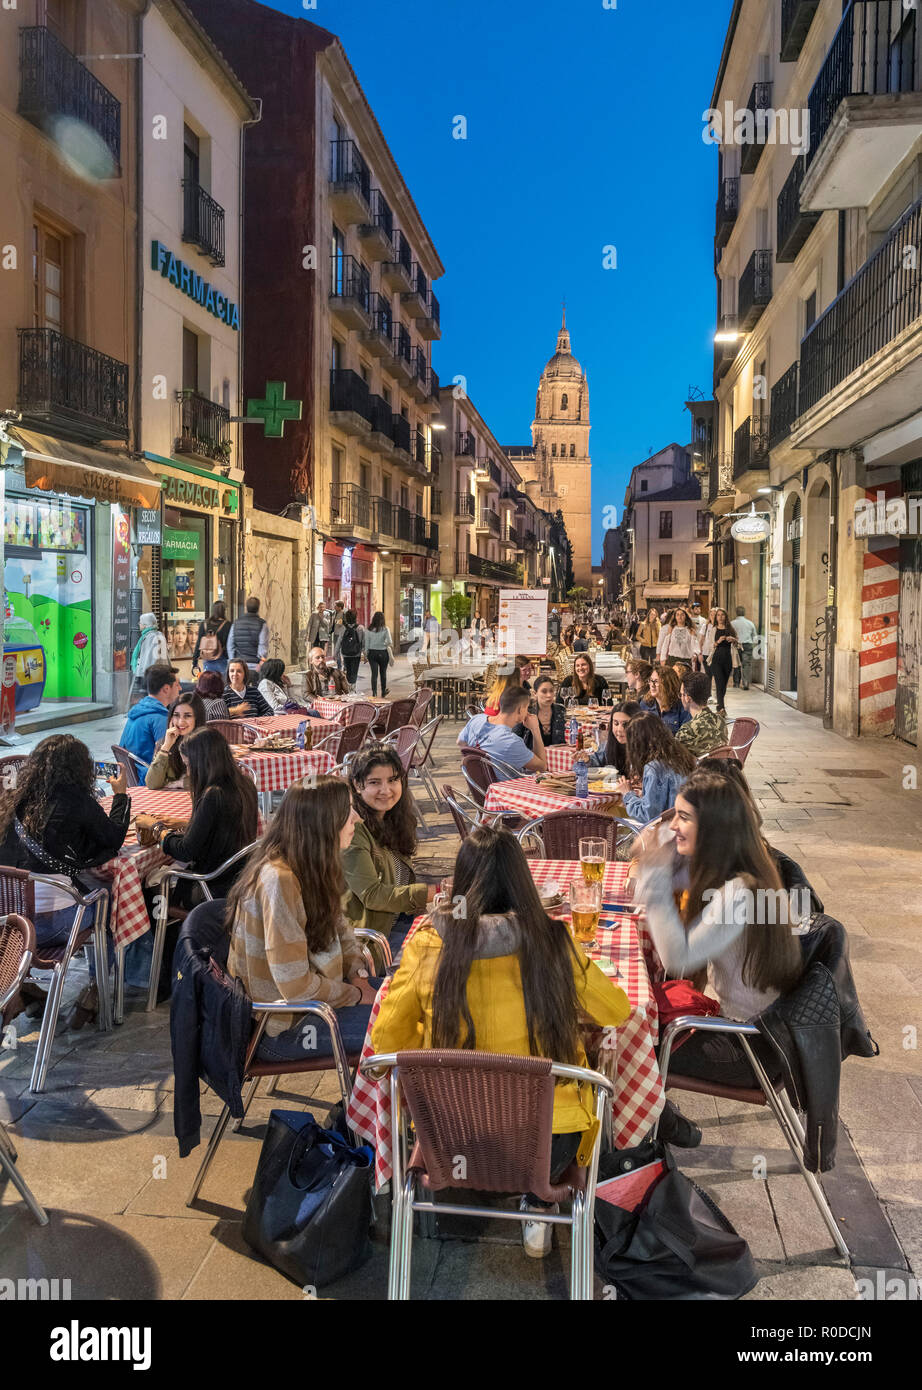 Students at a cafe at night on Calle Rúa Mayor looking towards the tower of the Old Cathedral, Salamanca, Castilla y Leon, Spain Stock Photo